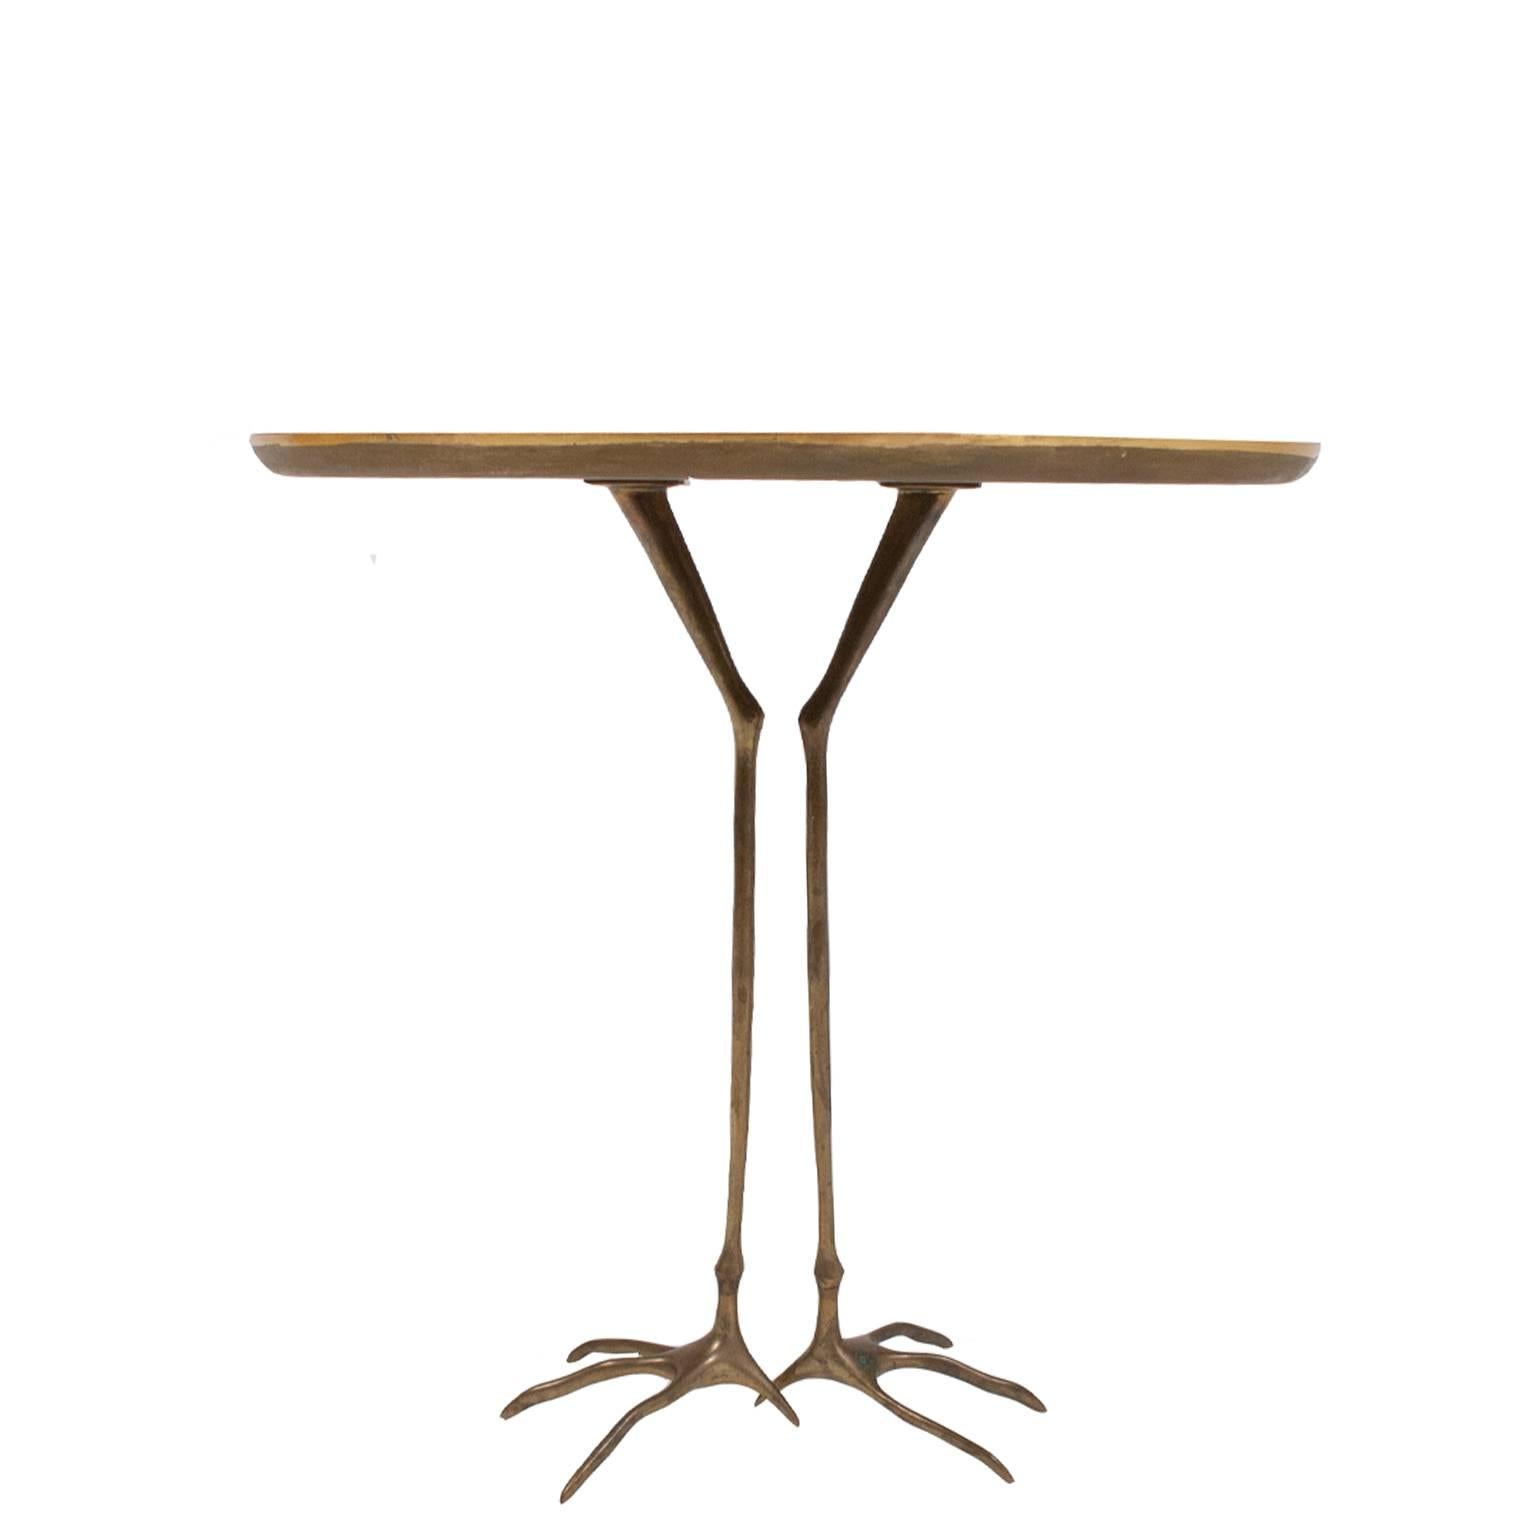 First production of table from the artist designed ultra-mobile collection. Top is gold leaf over wood with bird footprints, base is cast bronze in the shape of bird legs. Originally designed in 1939 by Surrealist artist Oppenheim, it did not go